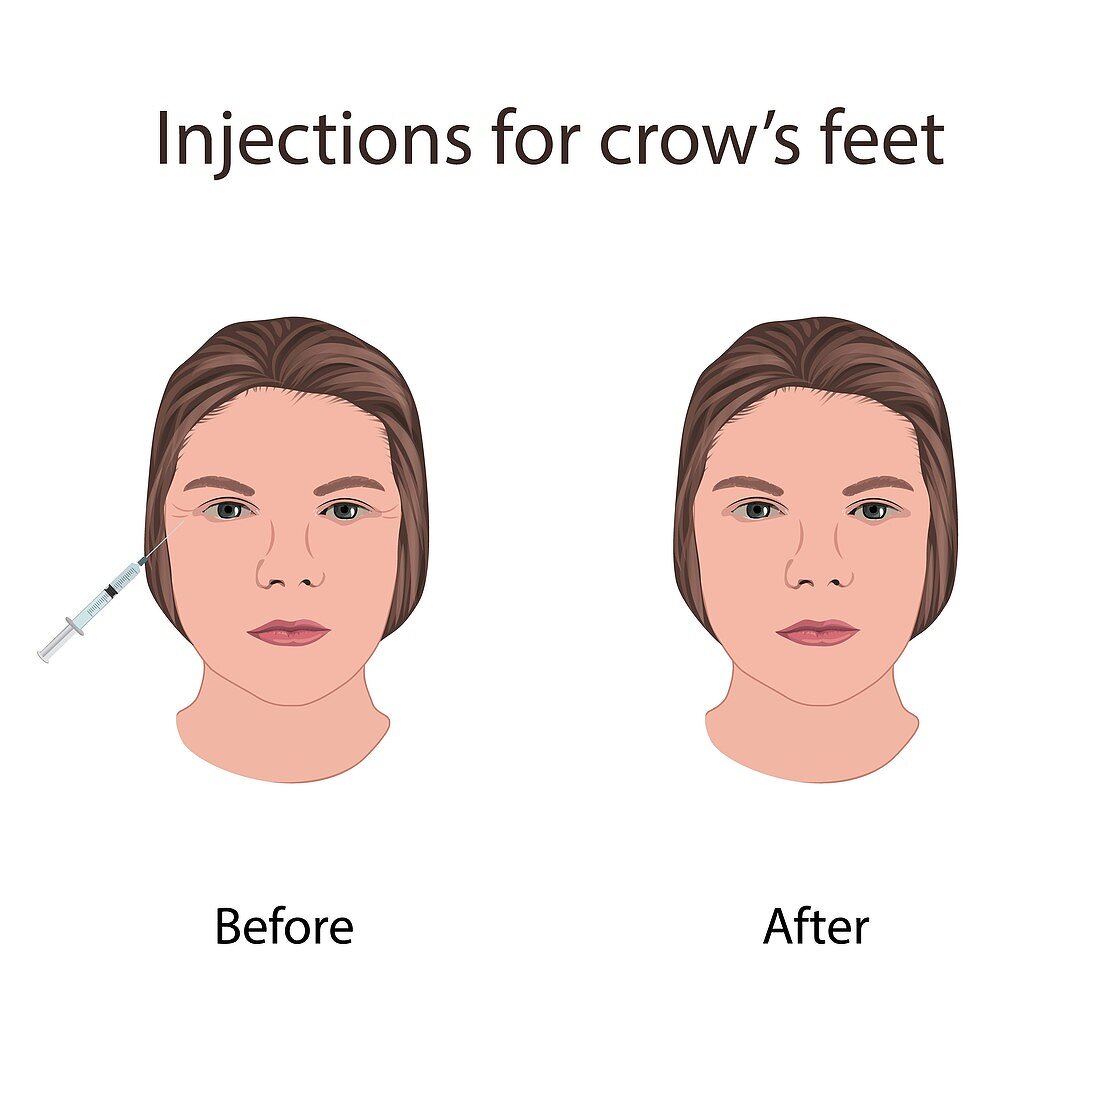 Injections for crow's feet, illustration